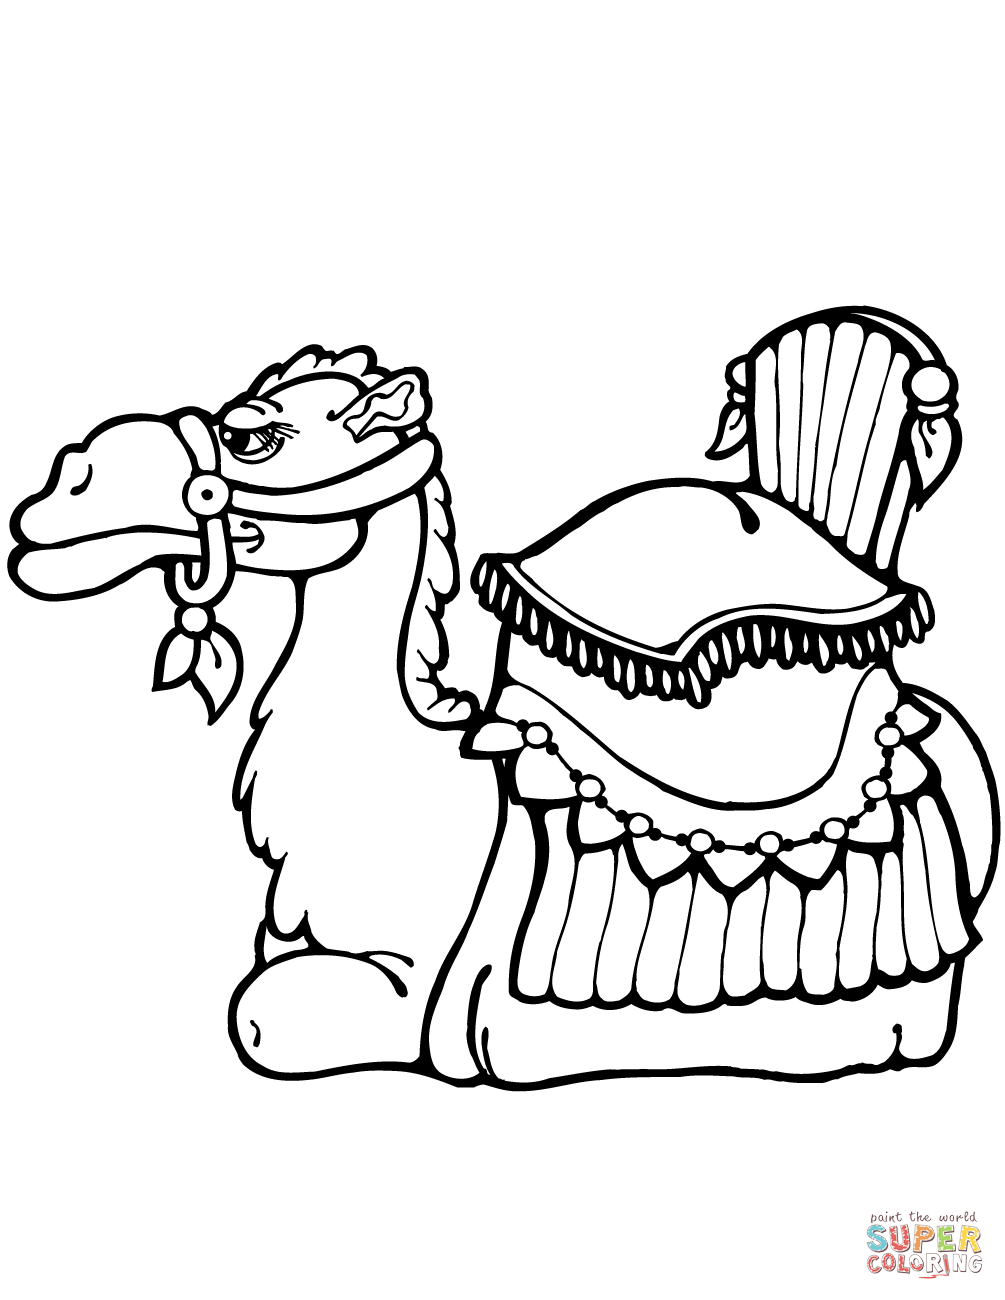 Camel laying down coloring page free printable coloring pages